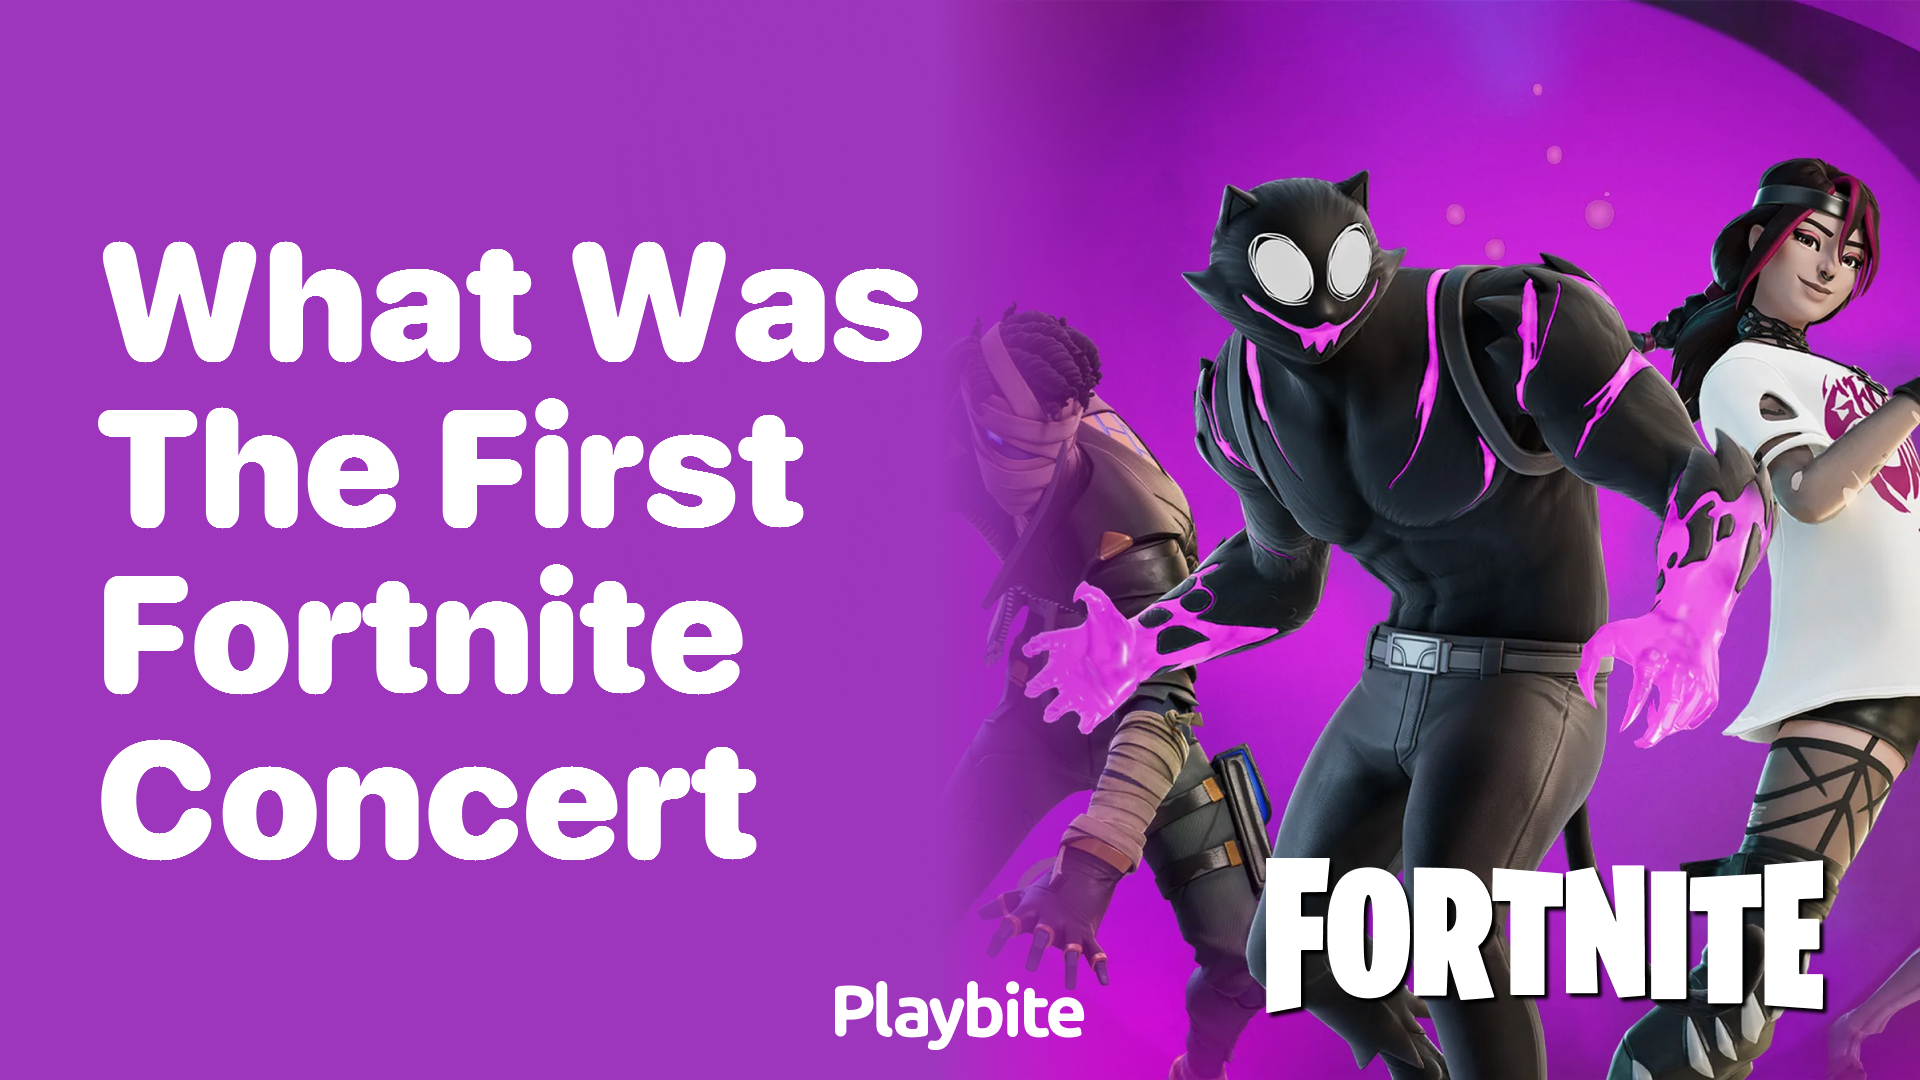 What Was the First Fortnite Concert?